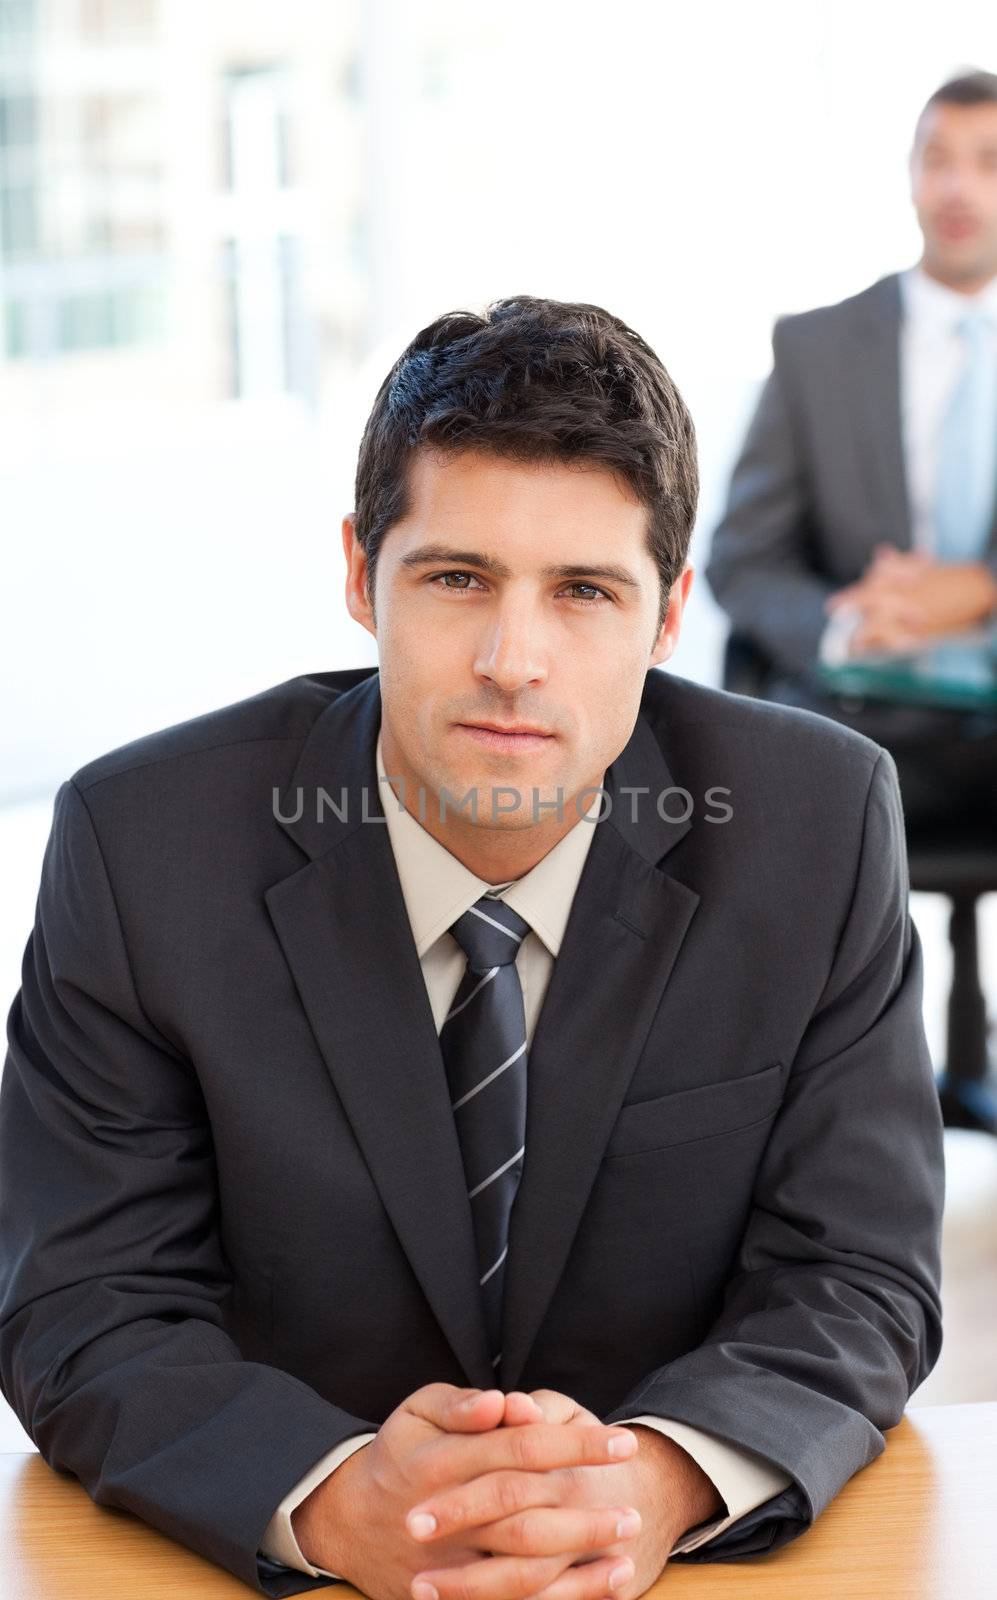 Concentrated businessman during a meeting with a colleague at the office